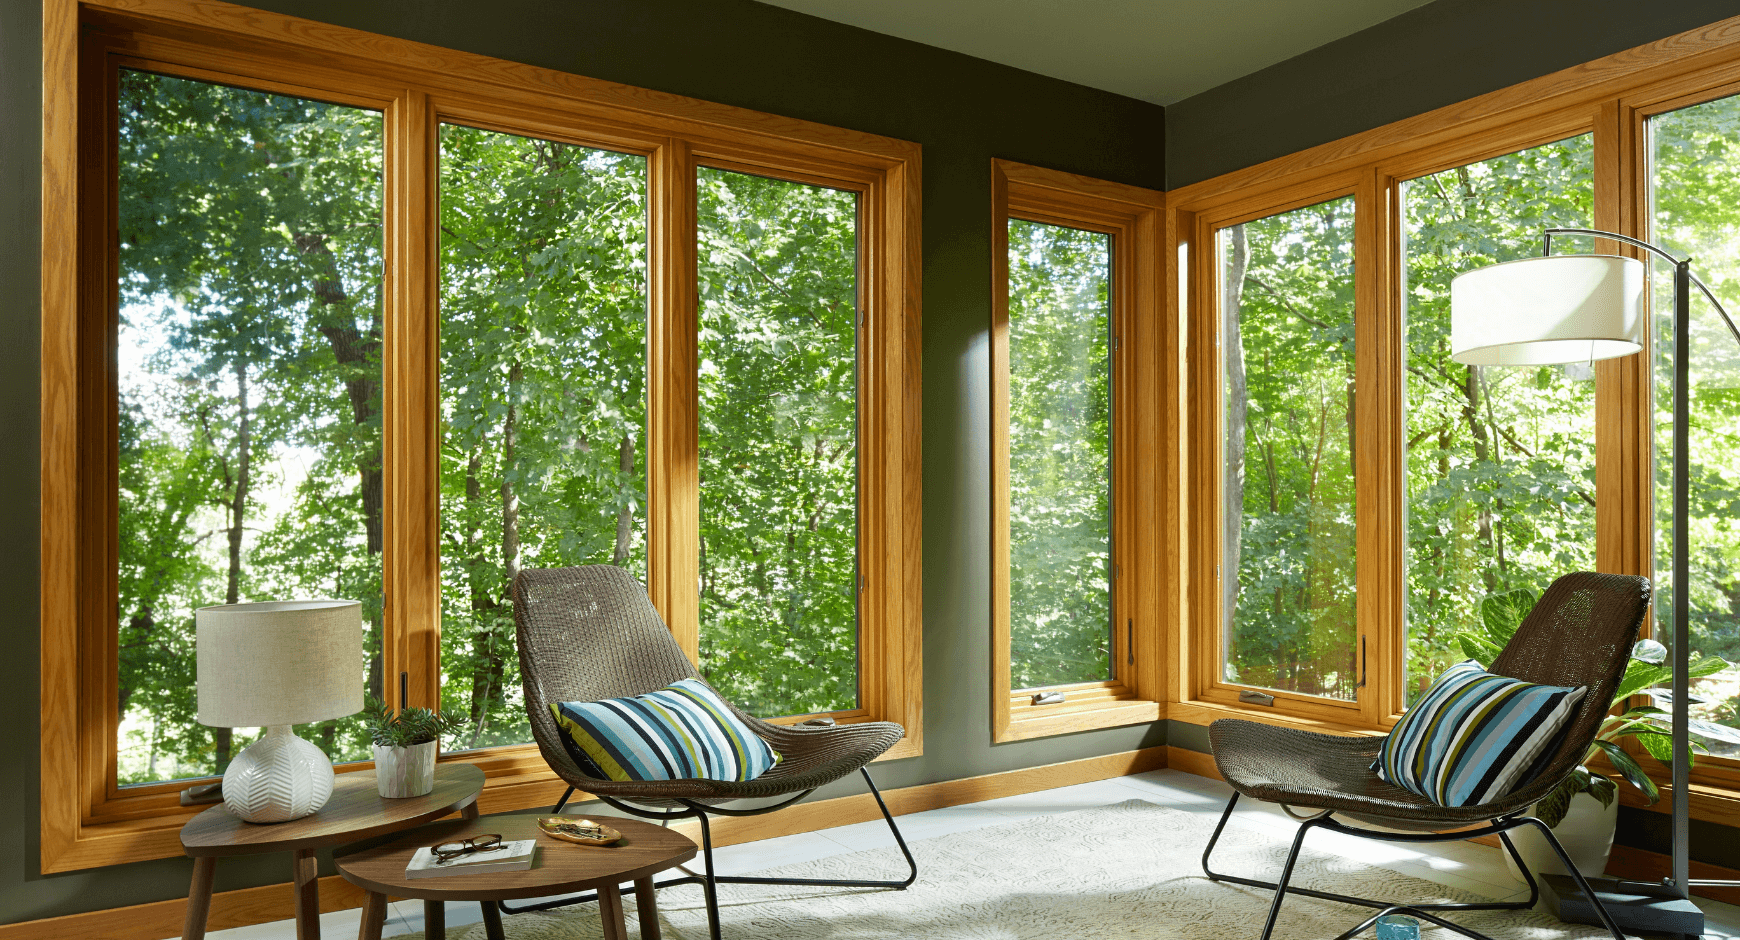 Image of an energy efficient home with large picture windows looking out into the woods